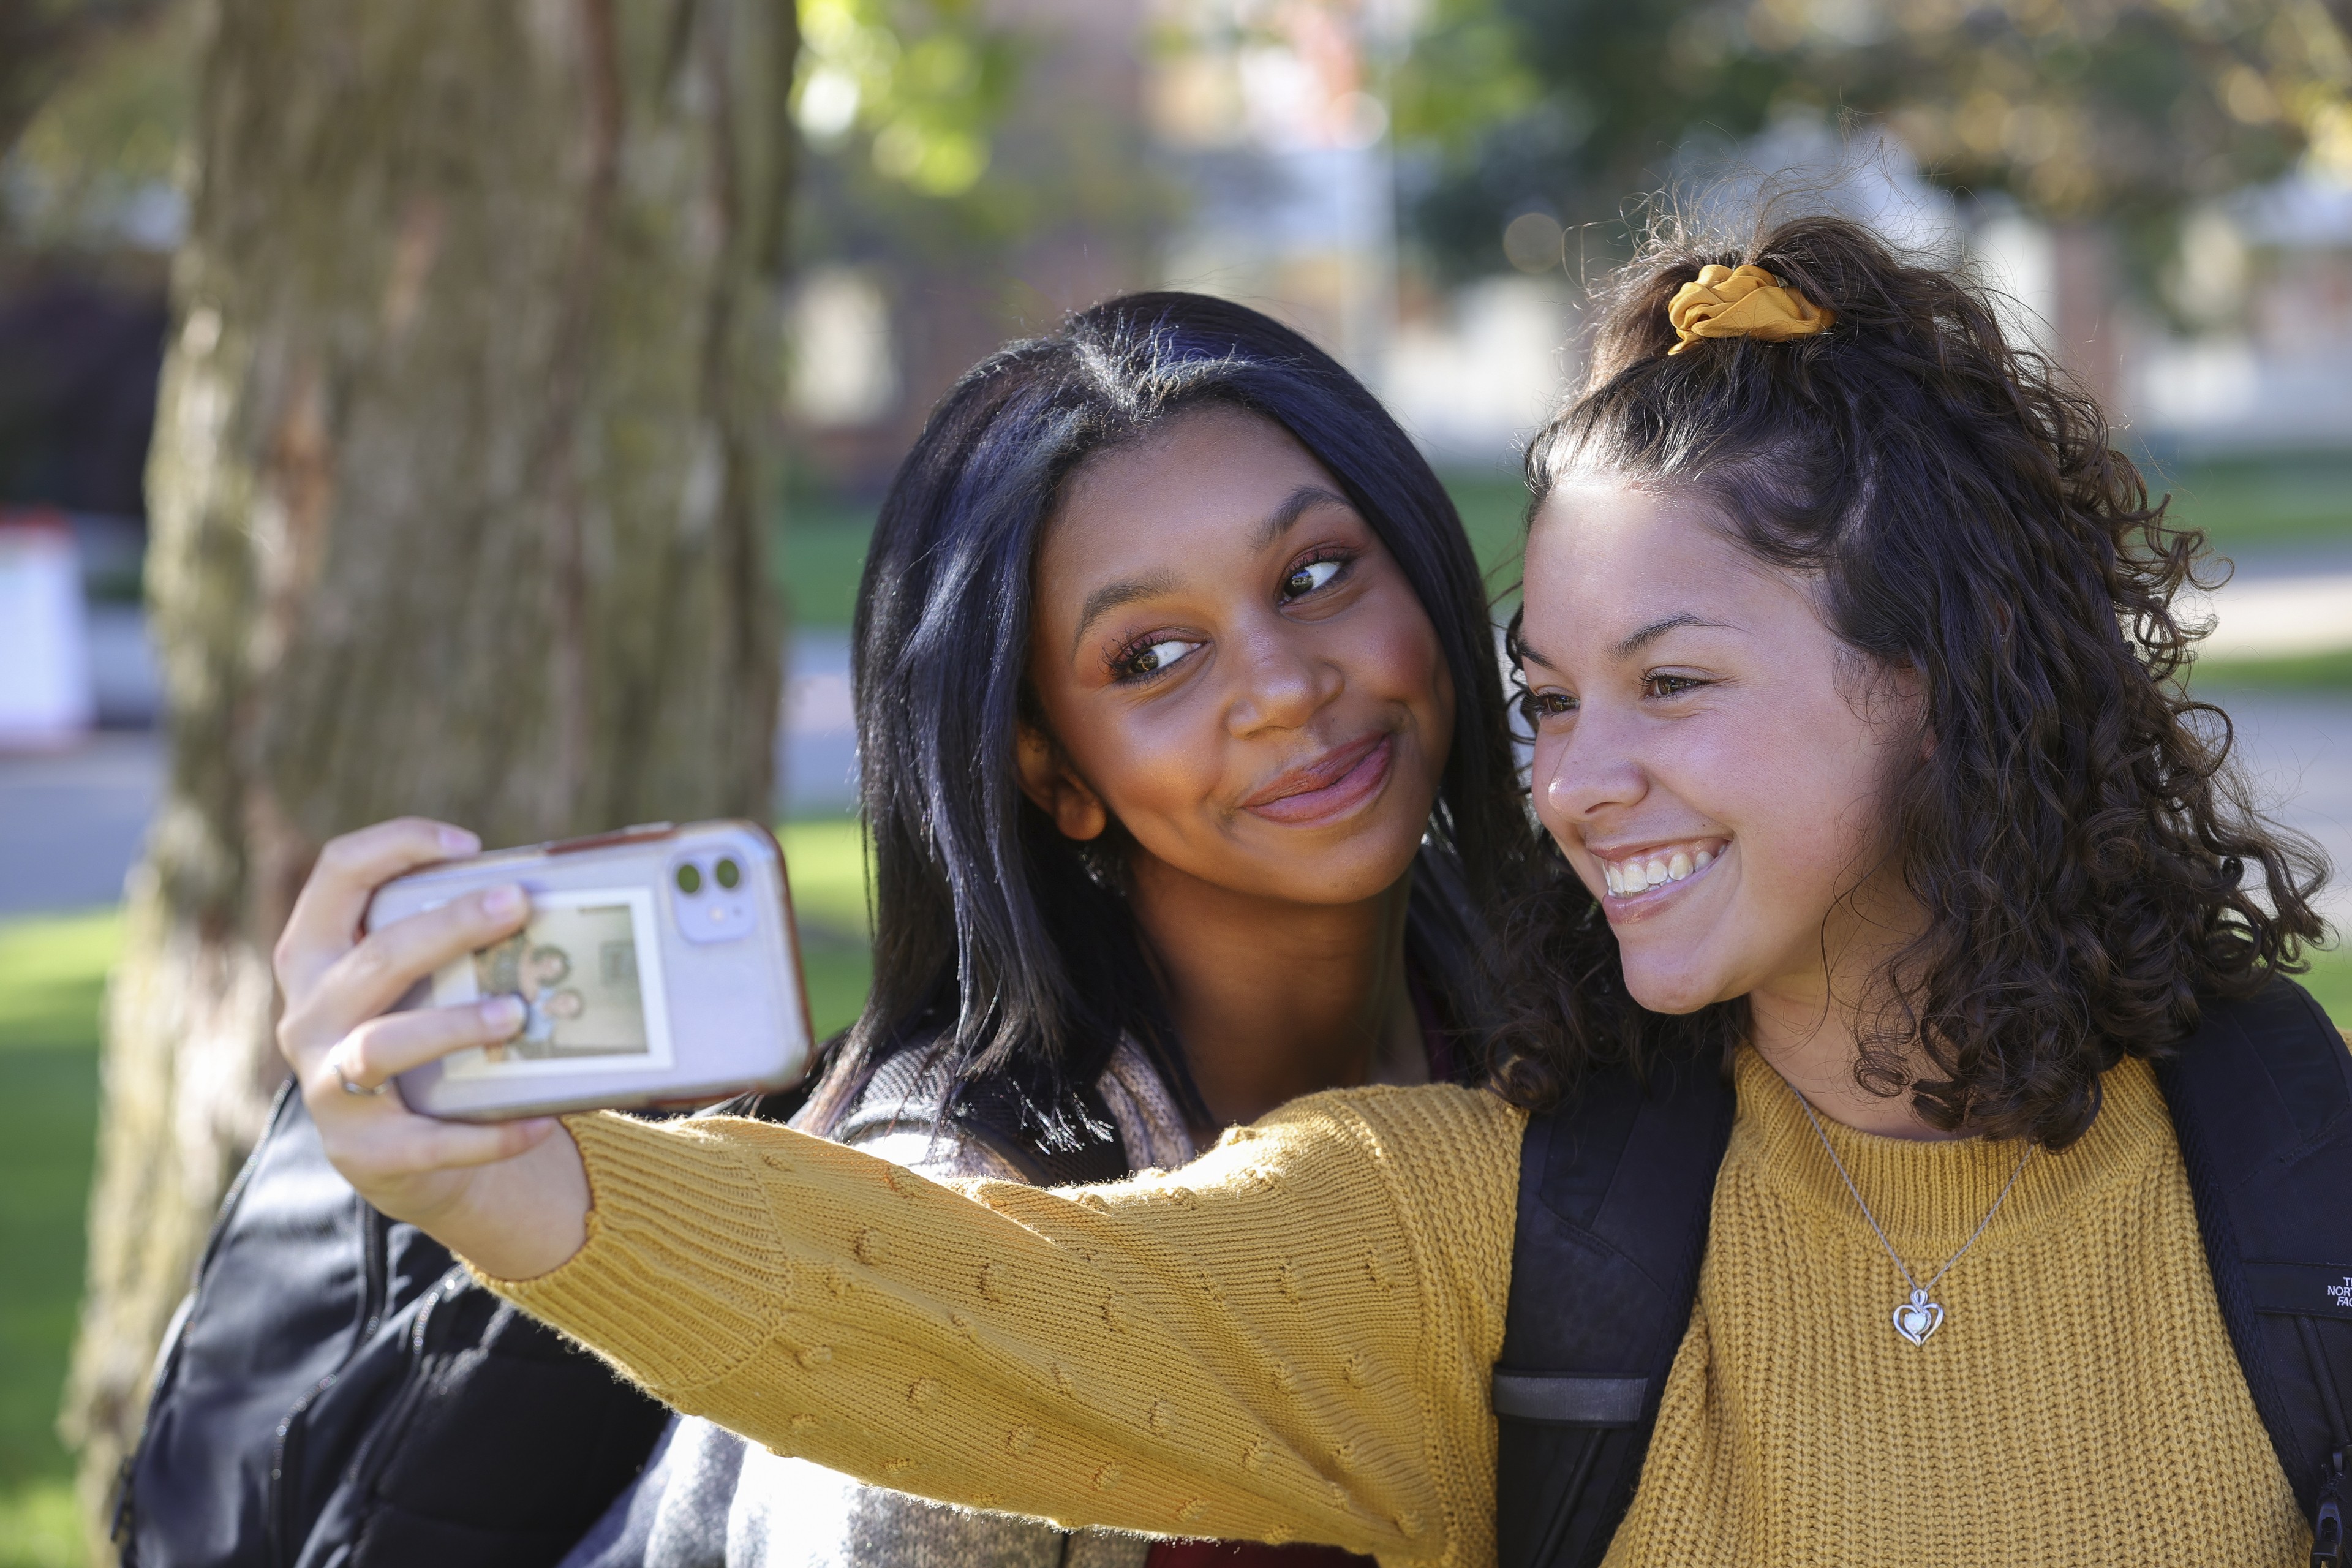 Two women taking a selfie. Cellphone habits are one phenomenon studied by BGSU graduate students in the popular culture program.